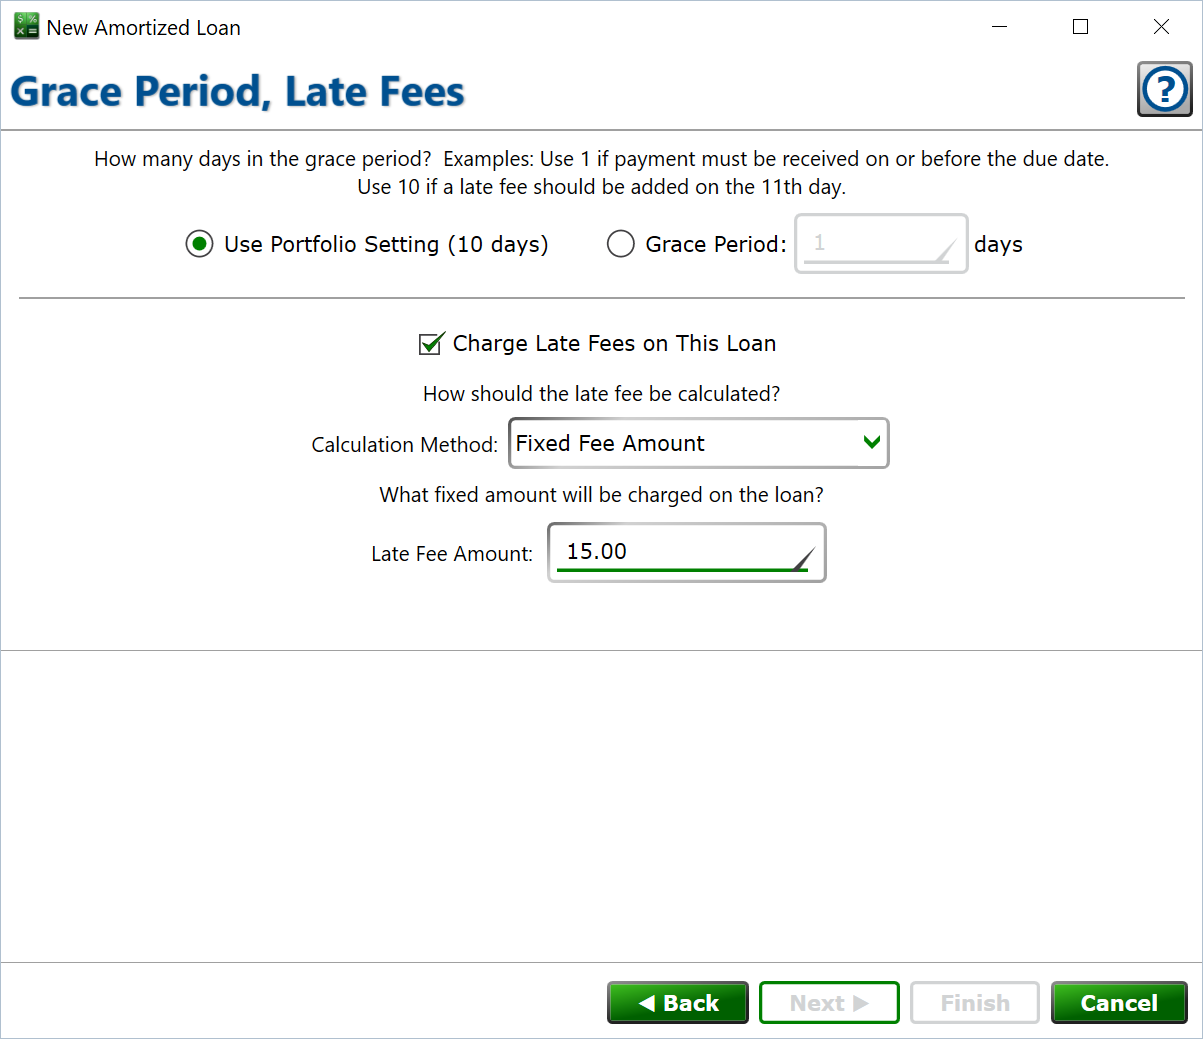 Screenshot of the form to set the grace period and late fees on a loan.